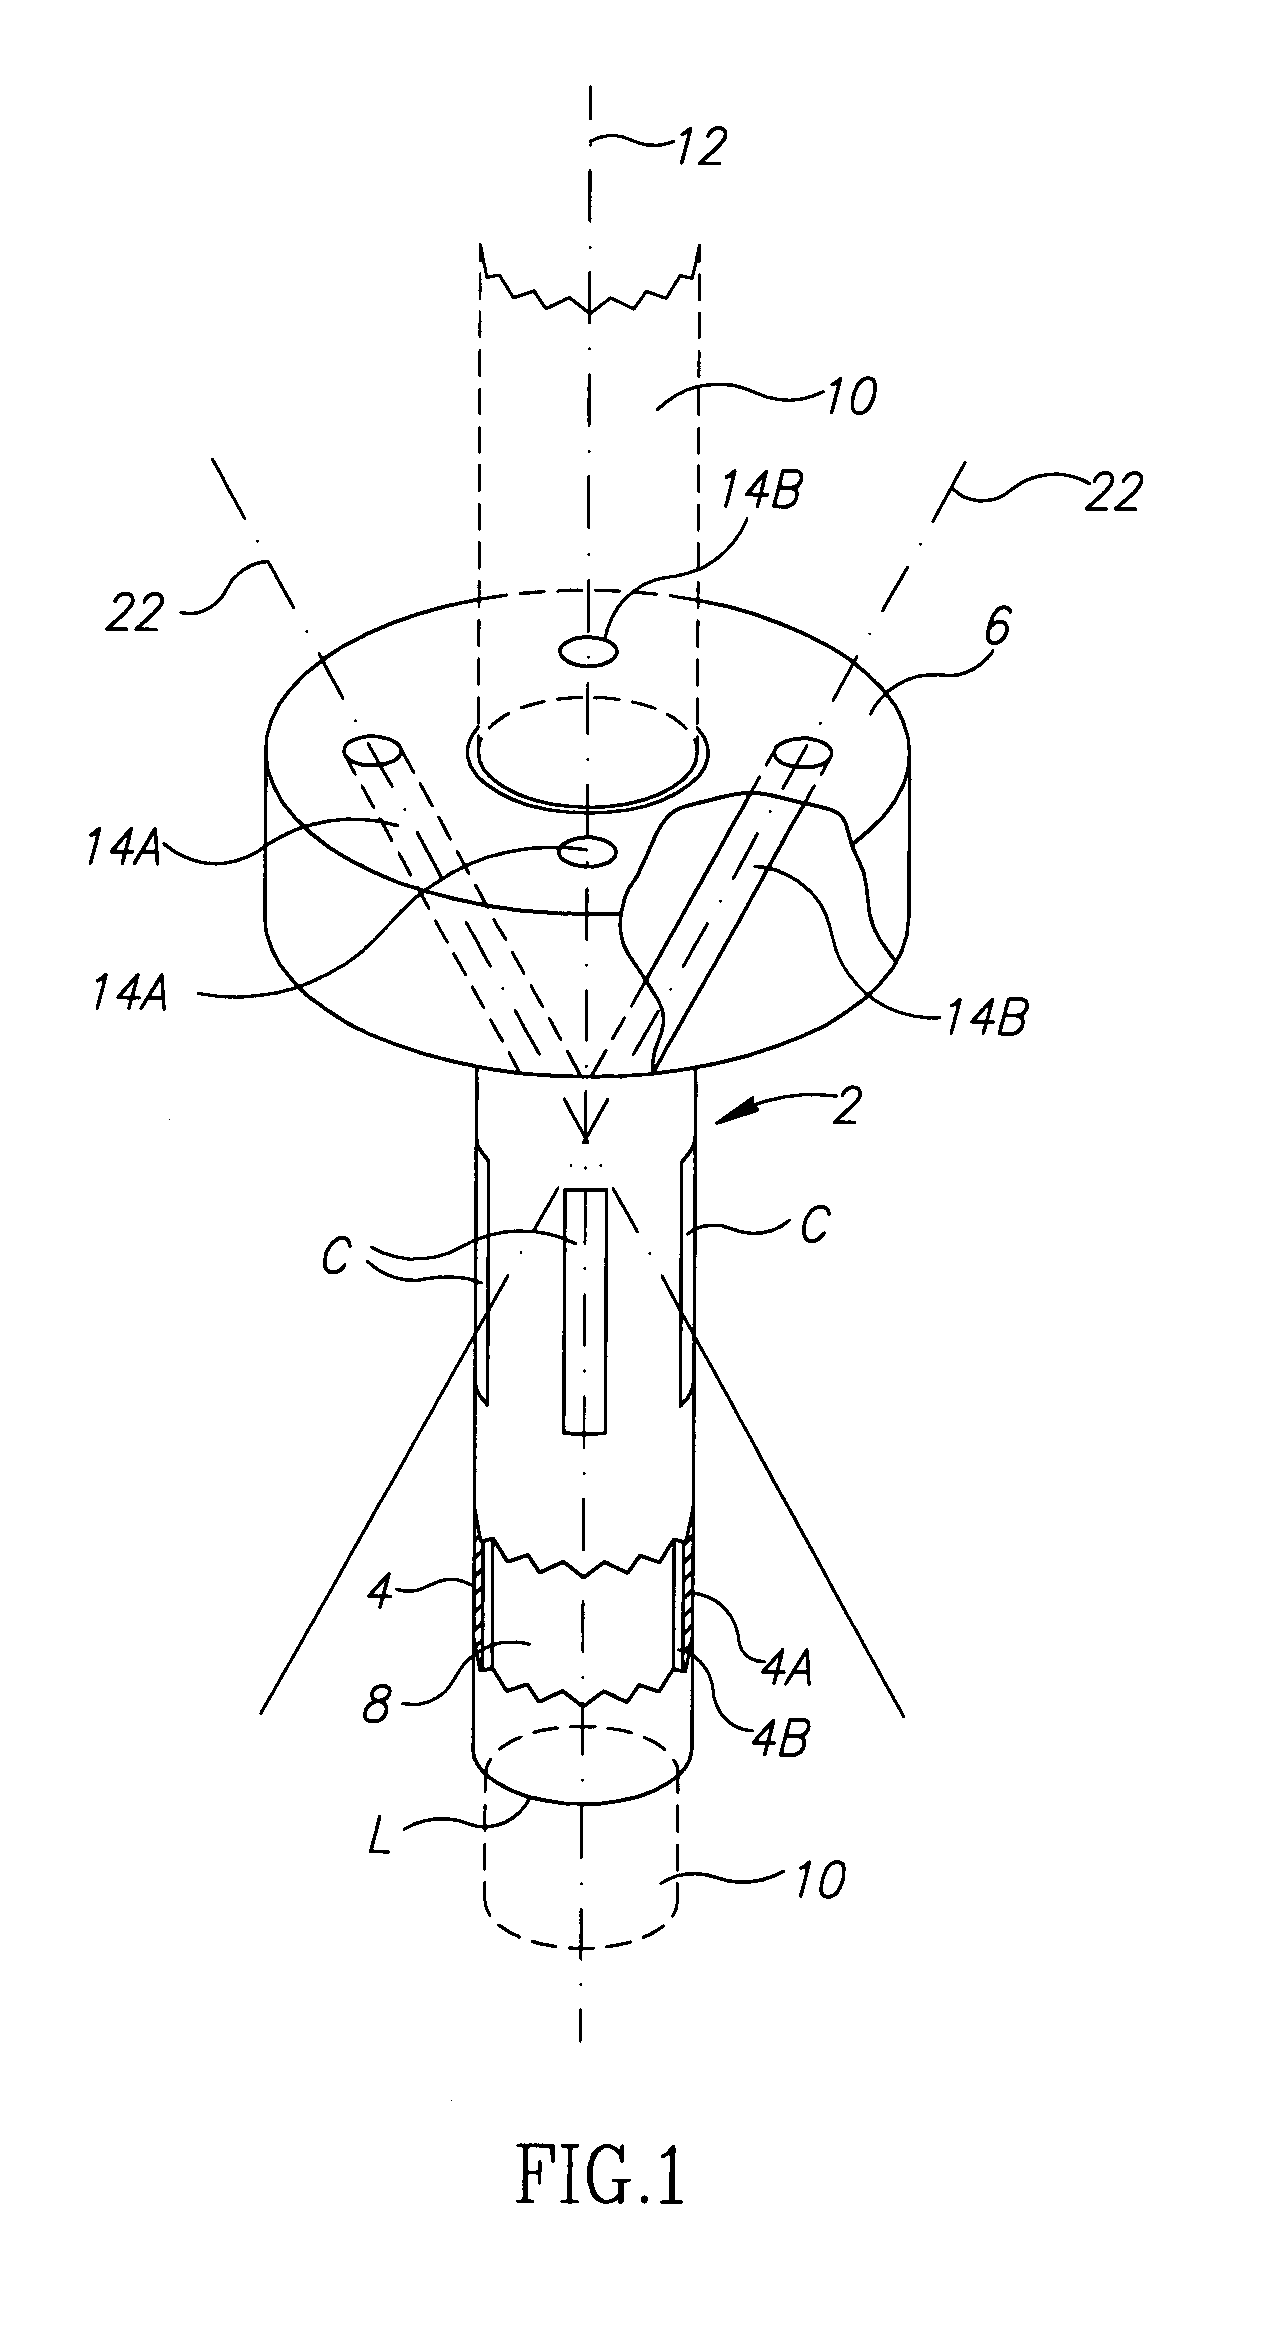 Device for wound suturing and hemostasis in the thoracic and the abdominal wall mainly in endoscopic operations